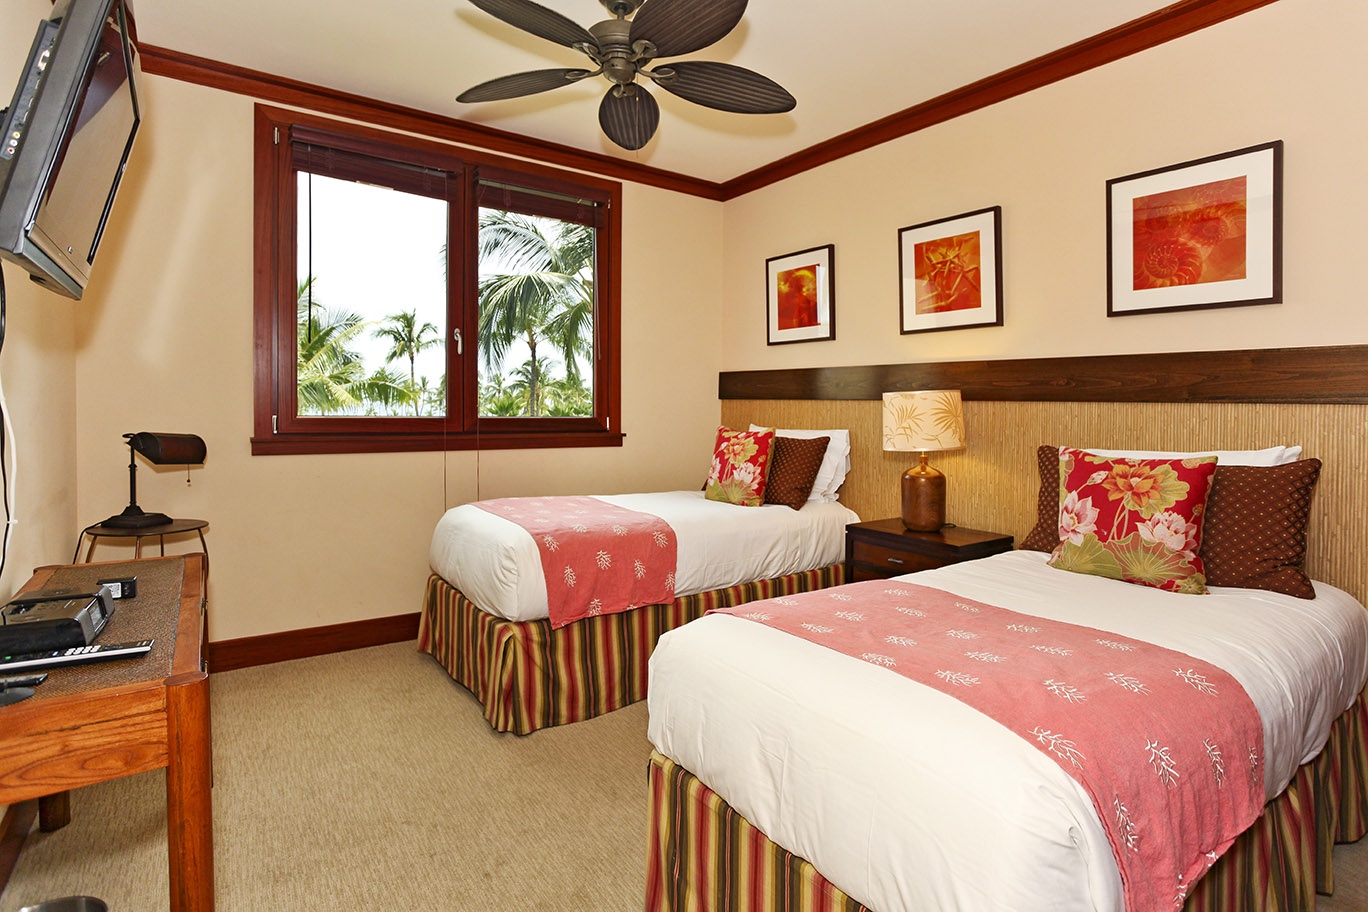 Kapolei Vacation Rentals, Ko Olina Beach Villas B301 - The third guest bedroom with twin beds and colorful framed art.